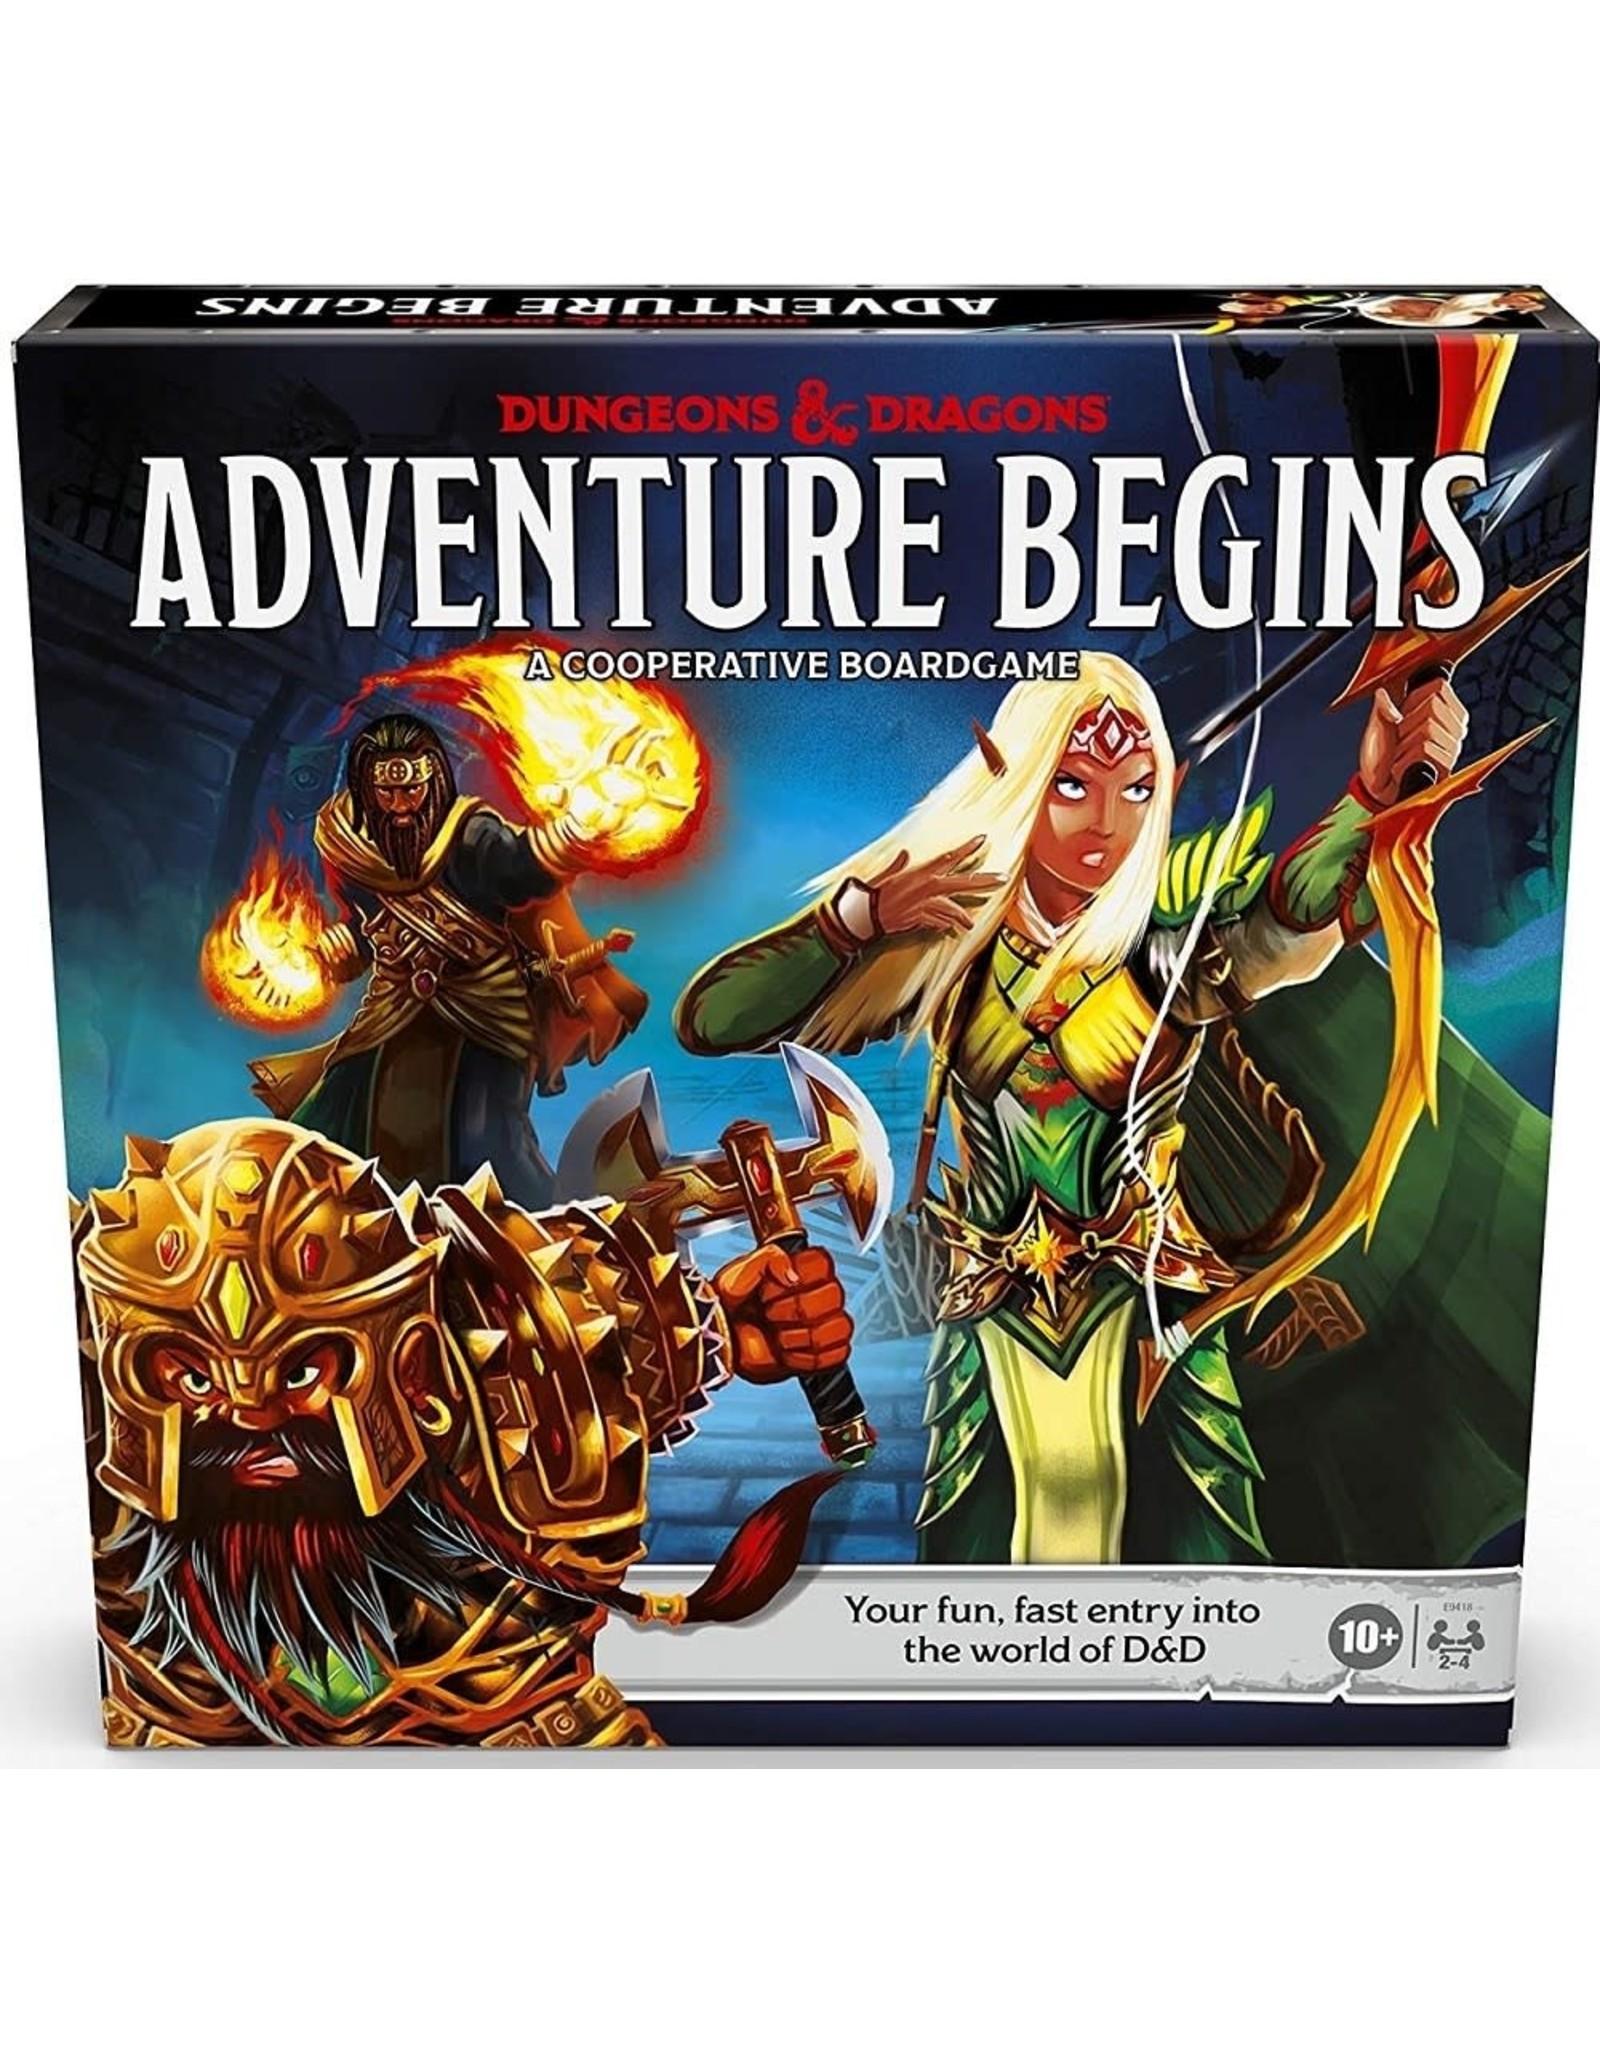 Dungeons & Dragons Dungeons & Dragons The Adventure Begins